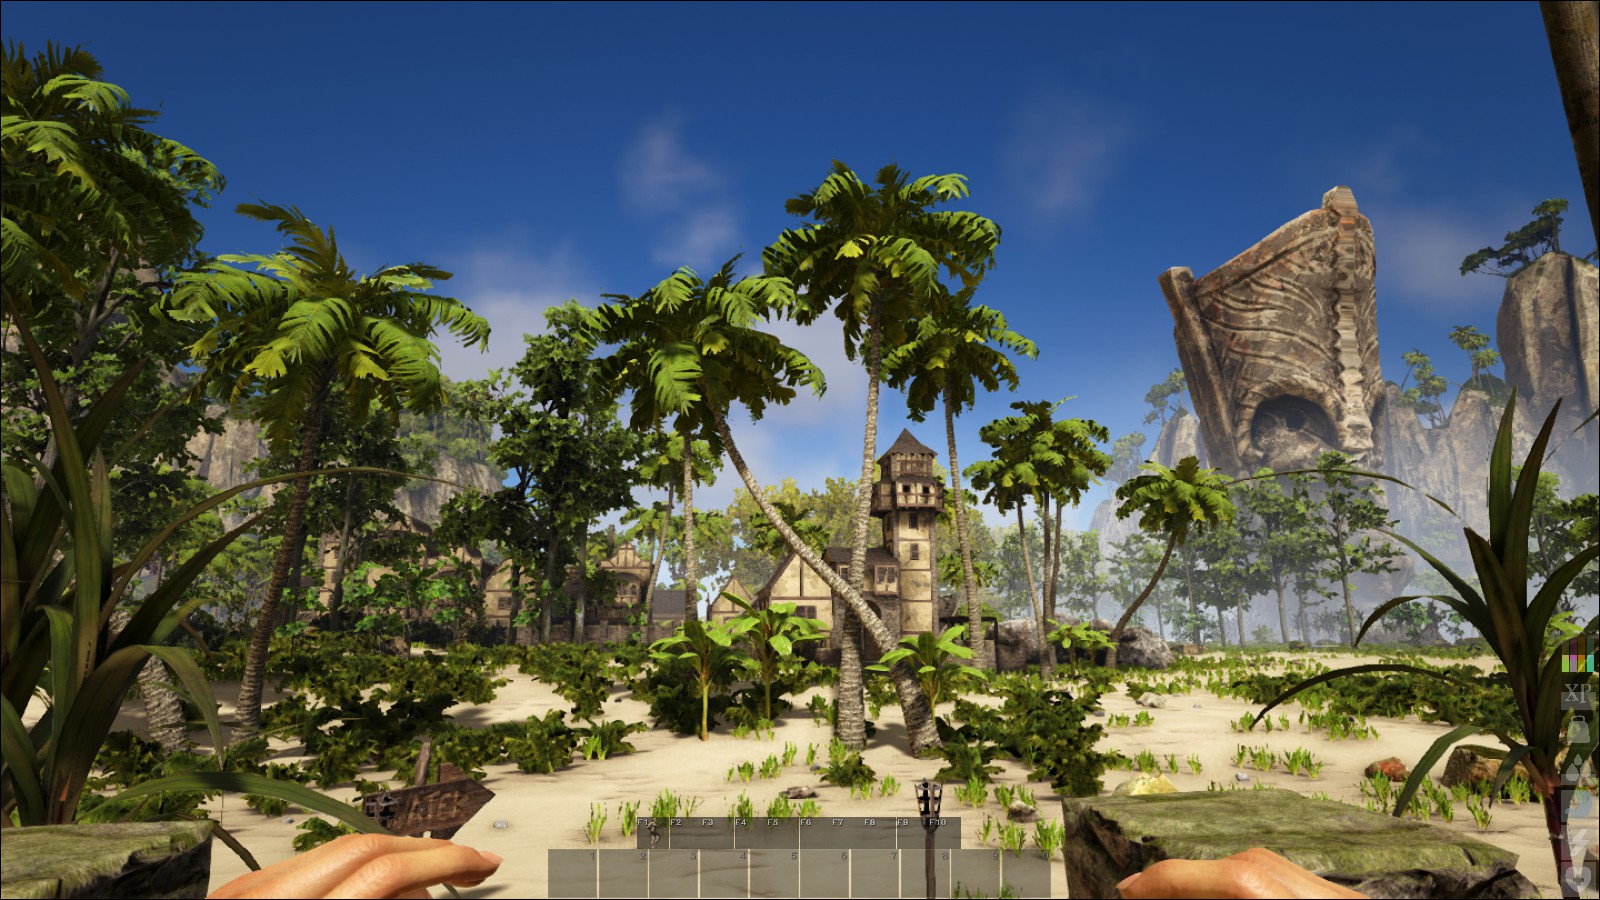 Screenshot from ATLAS: There is a tropical landscape with some half-timbered buildings